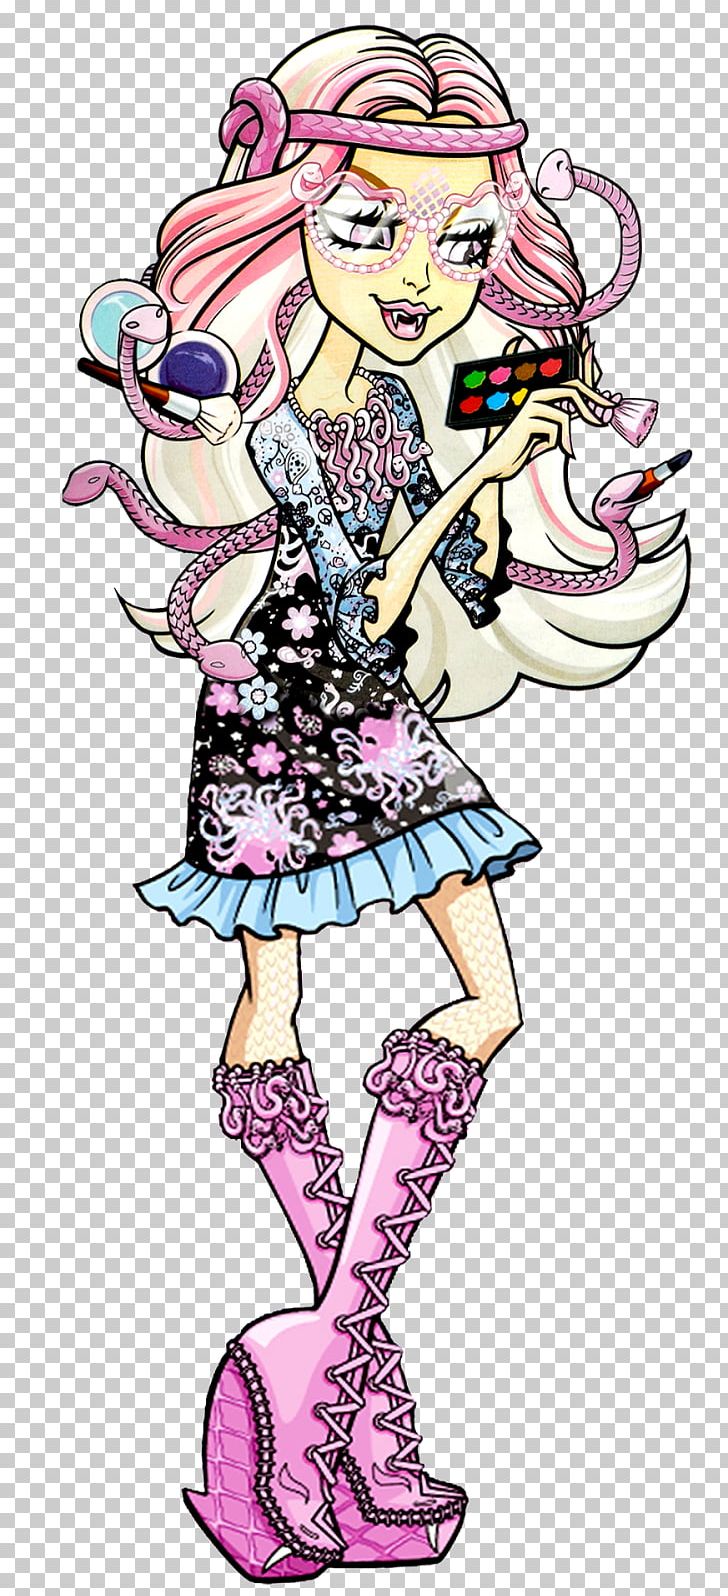 Monster High Frankie Stein Doll Gorgon PNG, Clipart, Arm, Bratz, Doll, Fashion Design, Fictional Character Free PNG Download